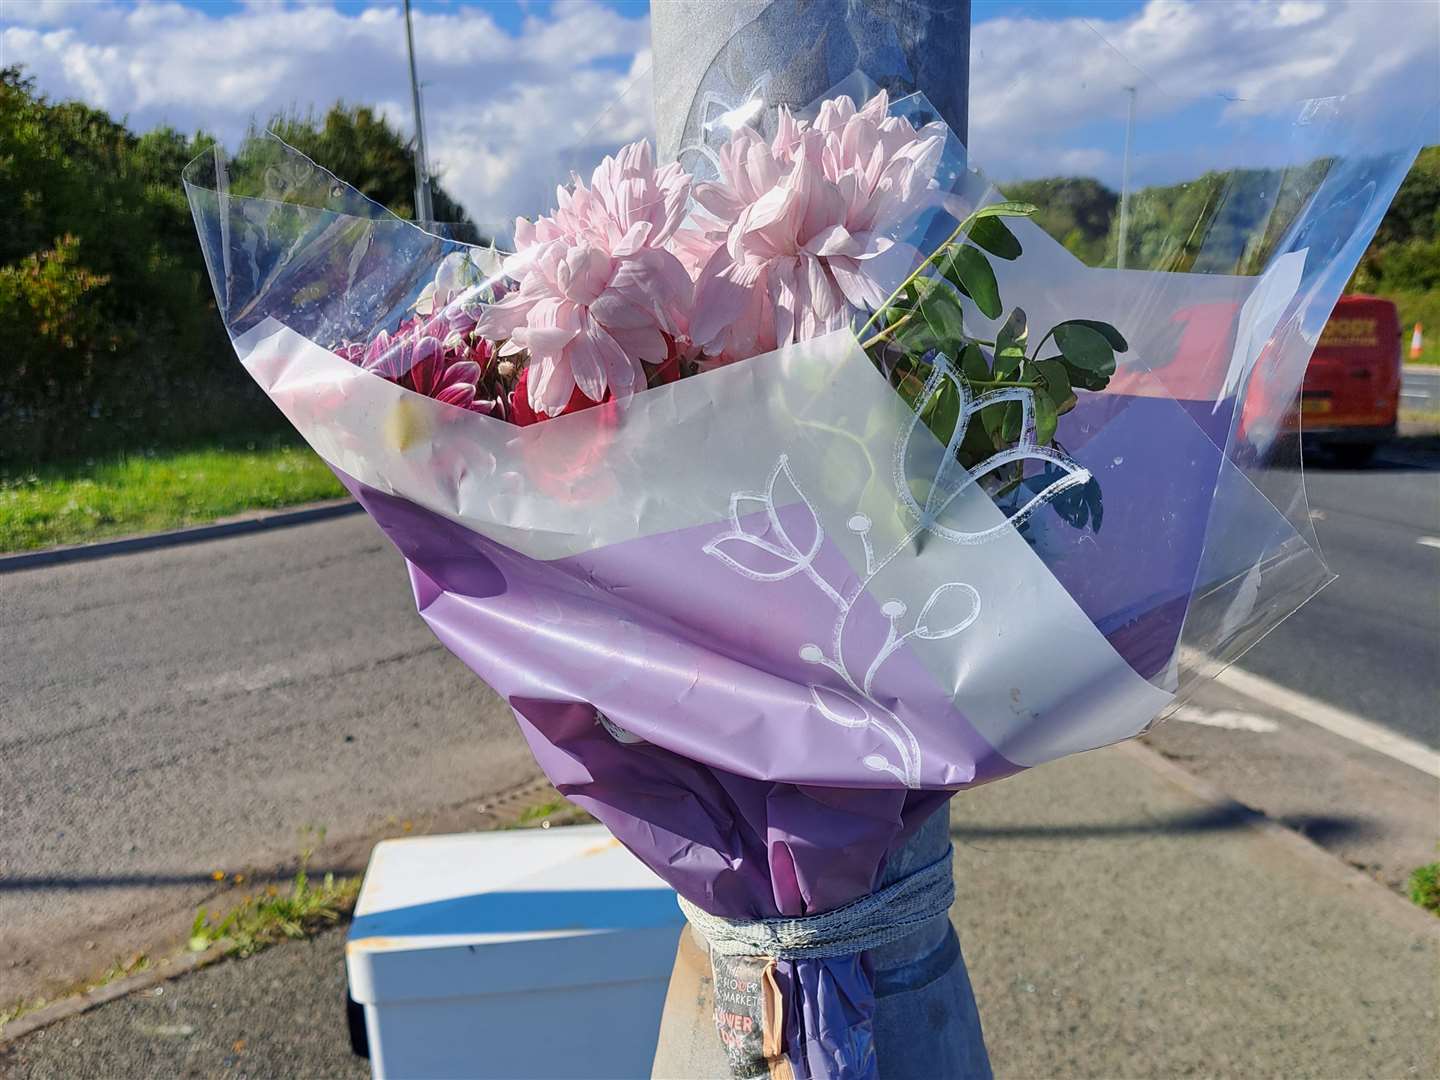 A single bunch of flowers have been tied to a lampost in tribute